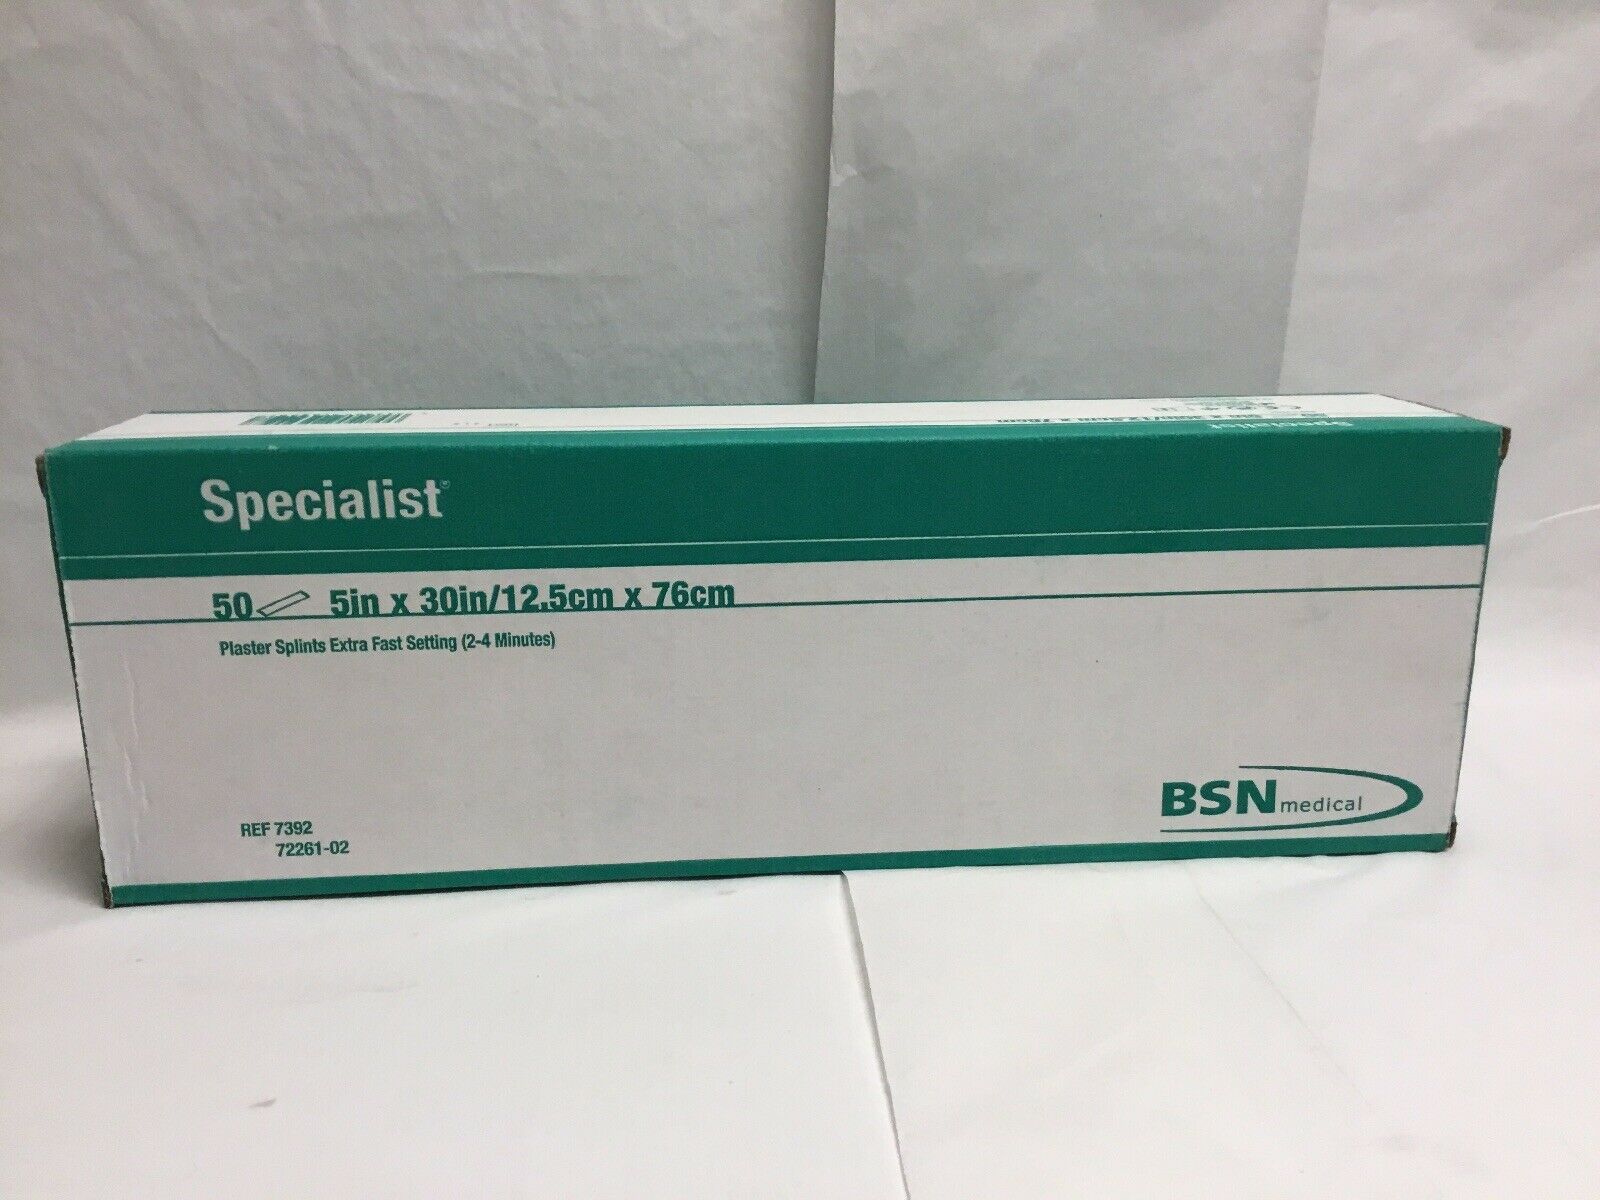 Specialist Plaster Splints Extra Fast Setting 5inx30in (58KMD) DIAGNOSTIC ULTRASOUND MACHINES FOR SALE